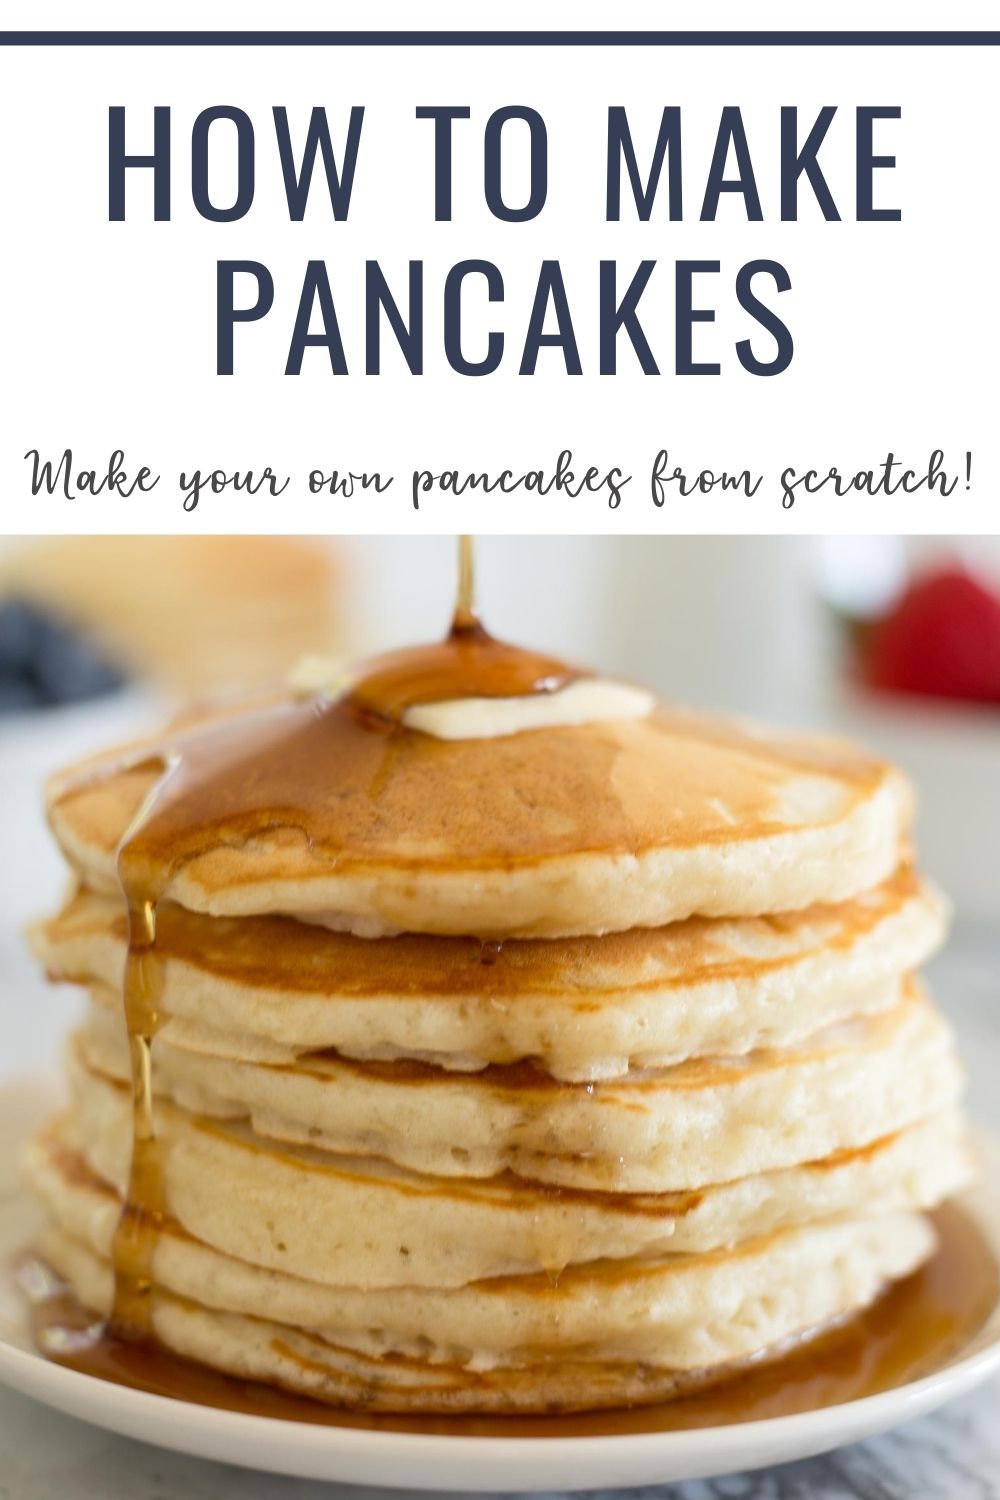 Best Ever Homemade Pancakes Recipe - Grace and Good Eats